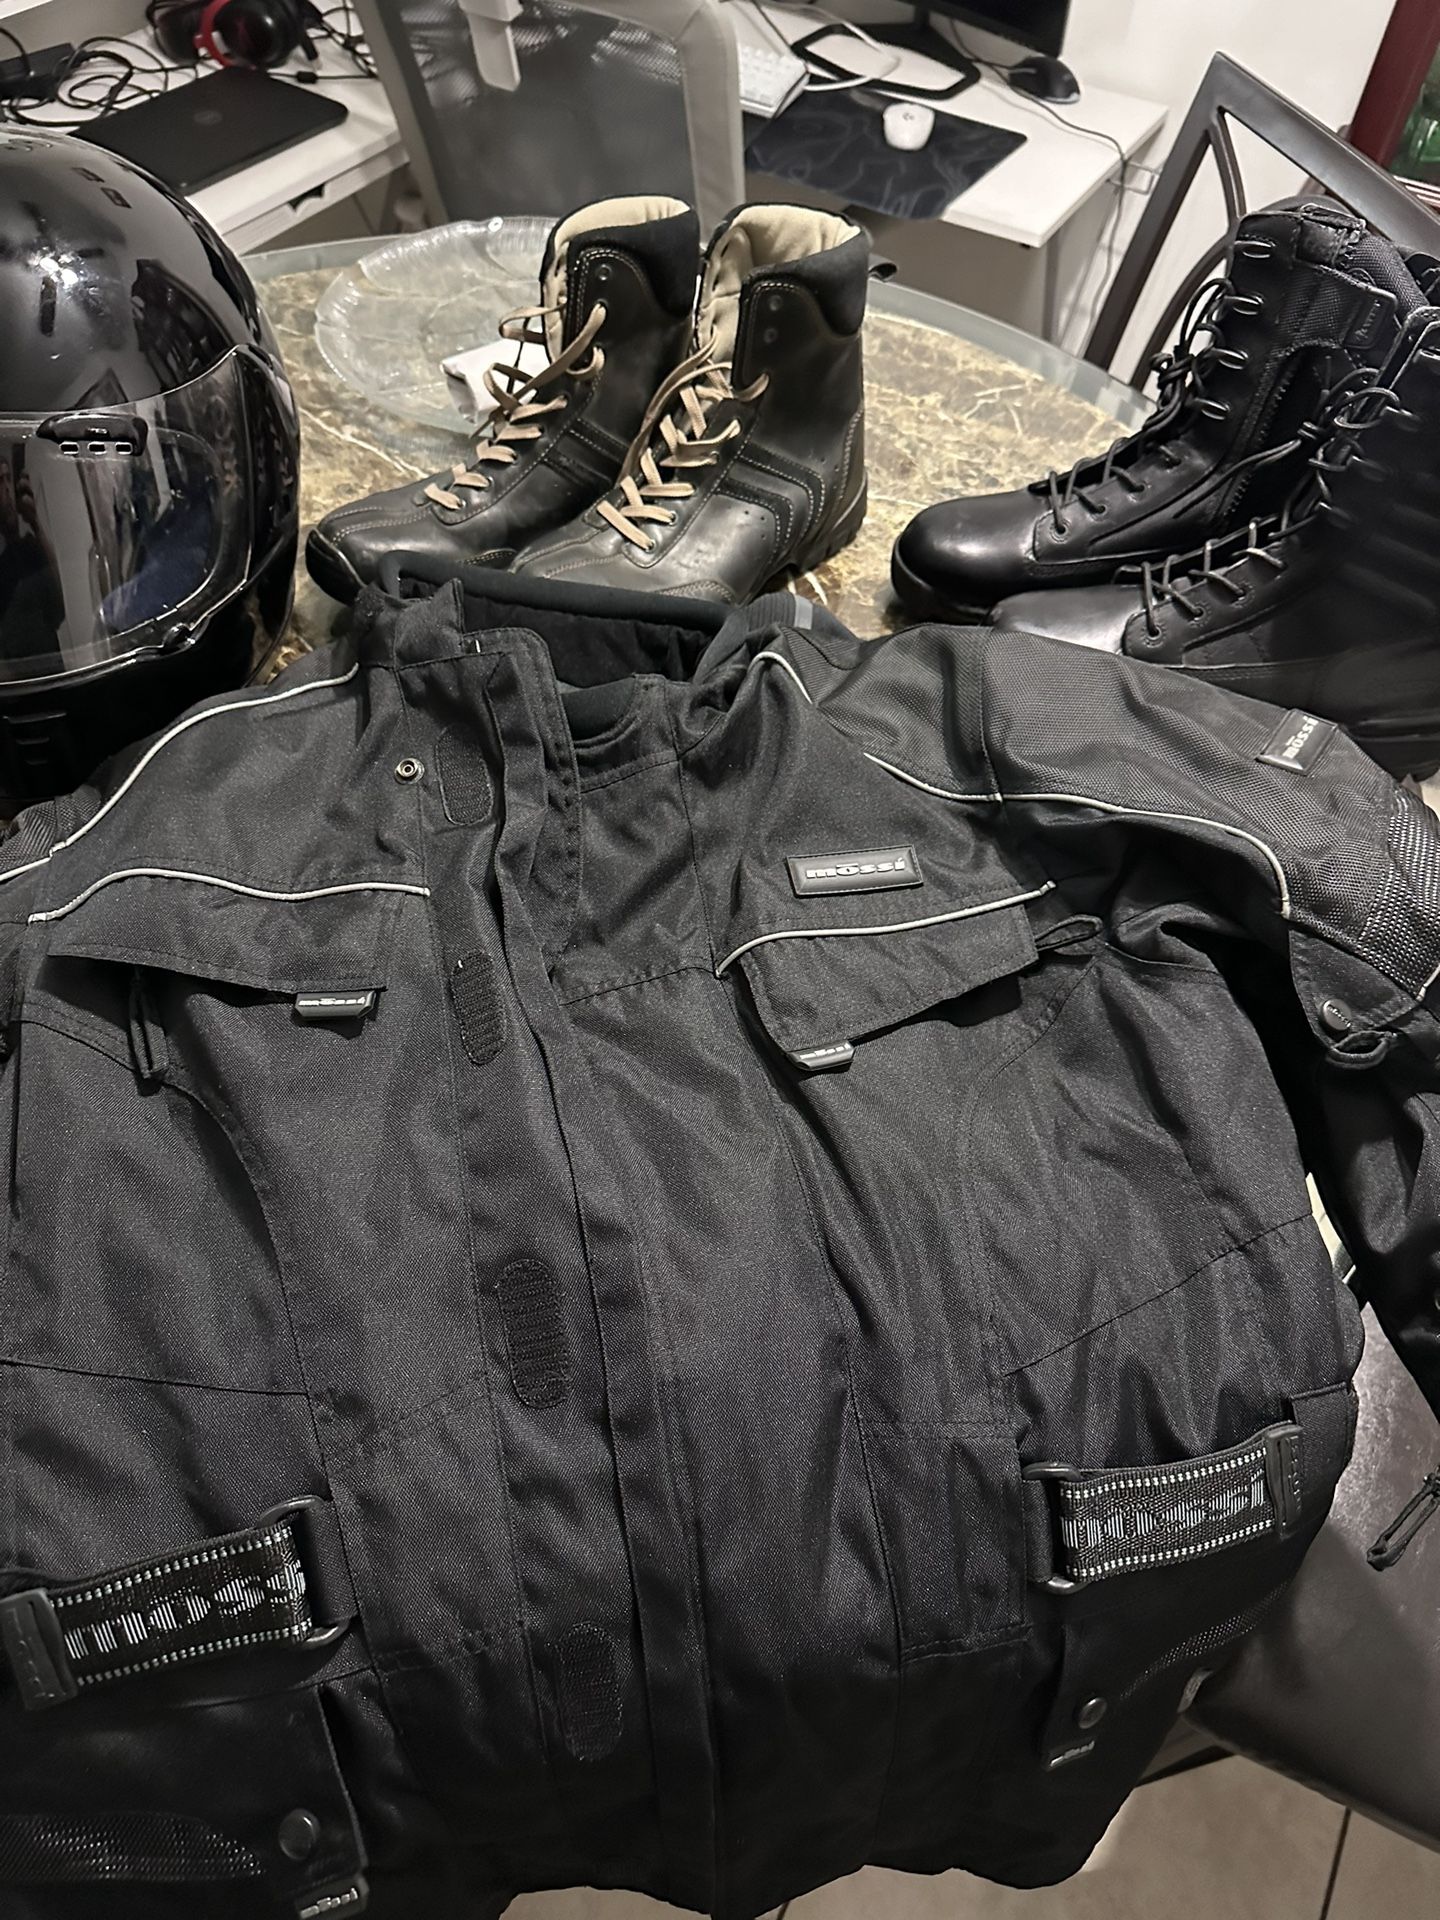 Padded Riders Suit And Accessories 